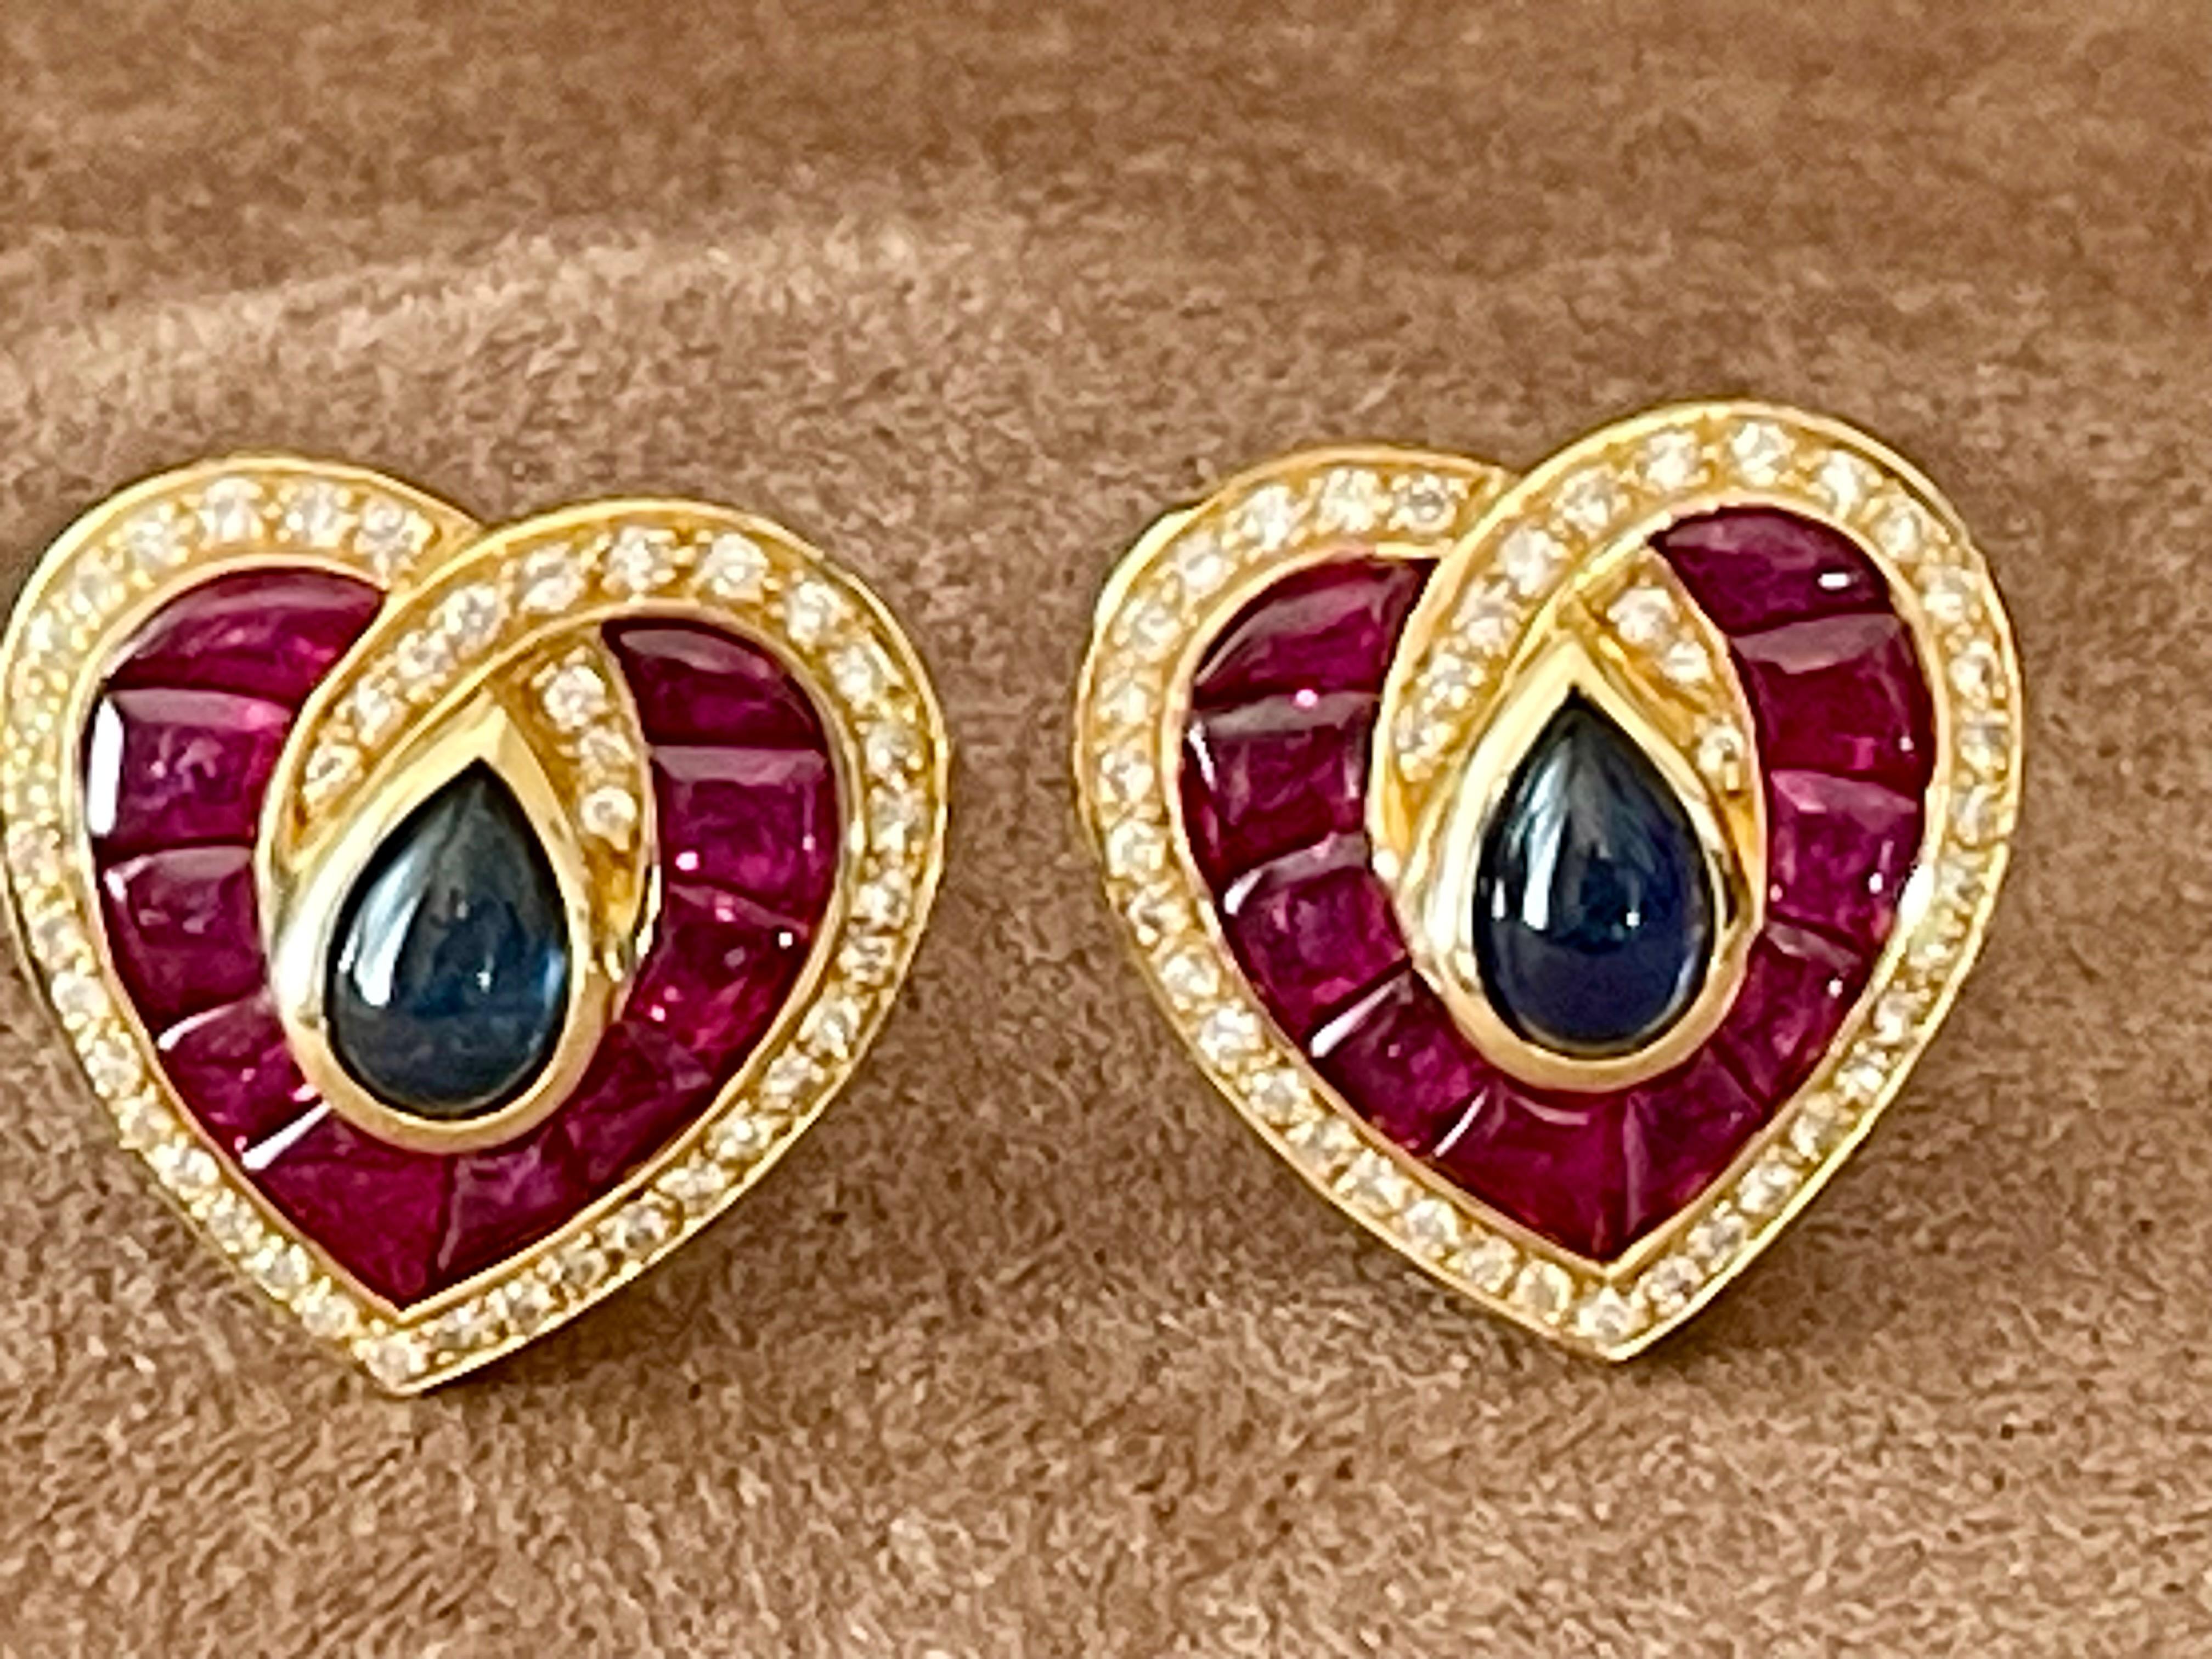 A pair of lovely 18 K yellow Gold heart shaped earclips of french provenance. These colorful earclips feature 2 lovely blue Sapphire Cabochons weighing 2.50 ct, 2o finely calibrated Rubies weighing 5.43 ct and Diamonds weighing 0.63 ct, G, color,